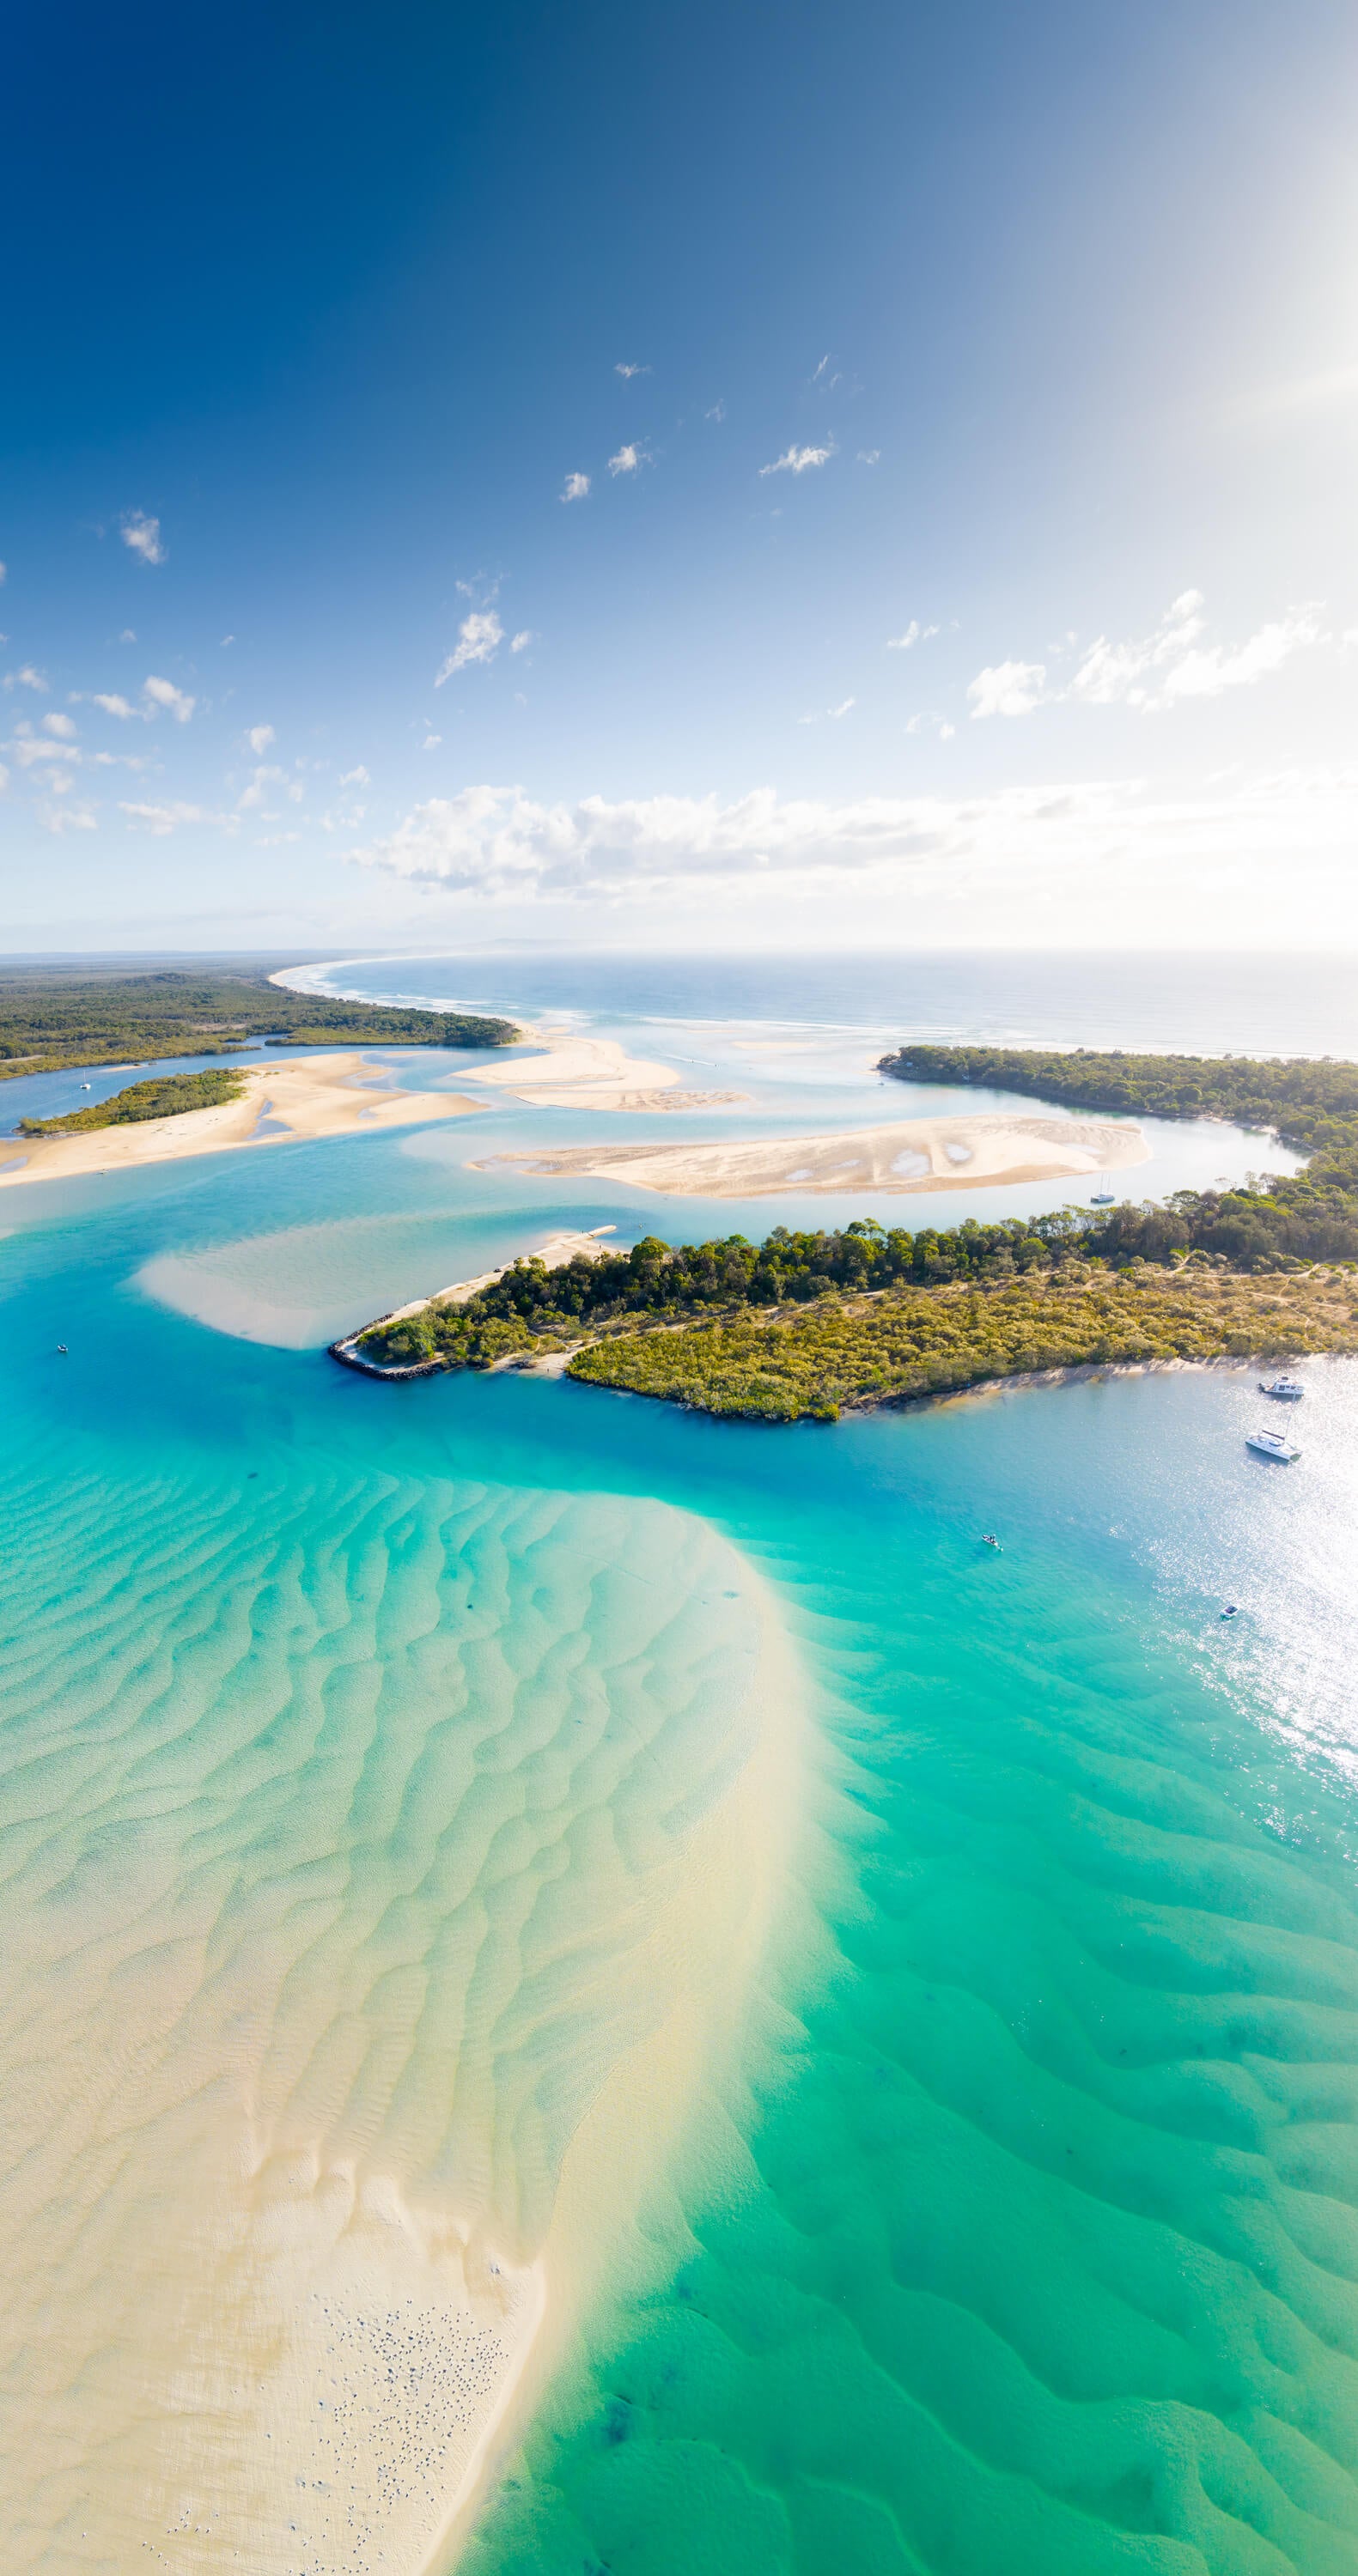 Serene - Noosa River mouth - Dave Wilcock Photography